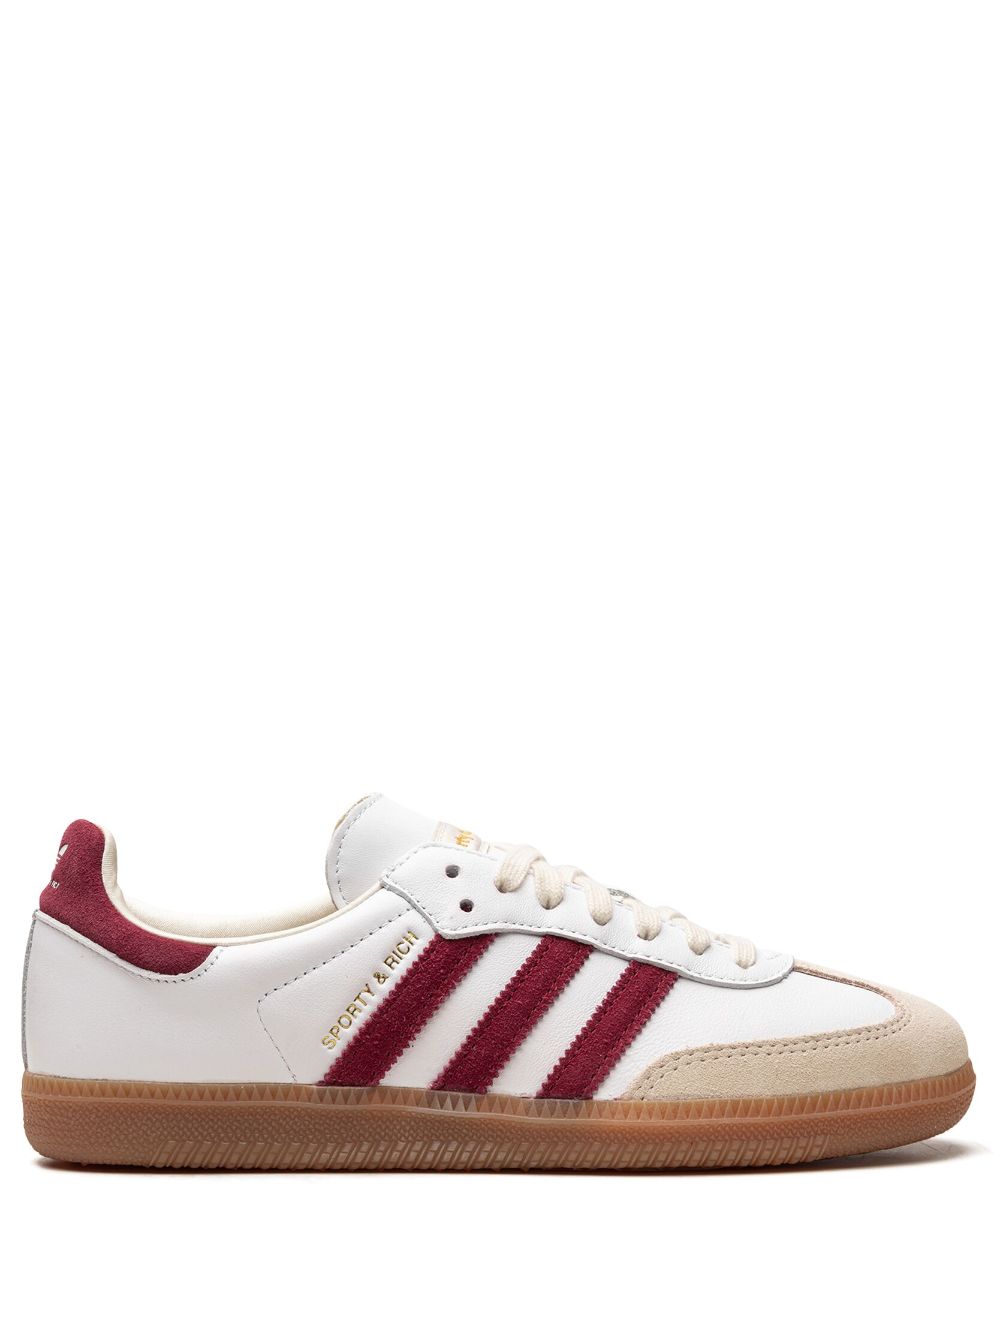 Adidas Originals X Sporty & Rich Samba Og Sneakers In White